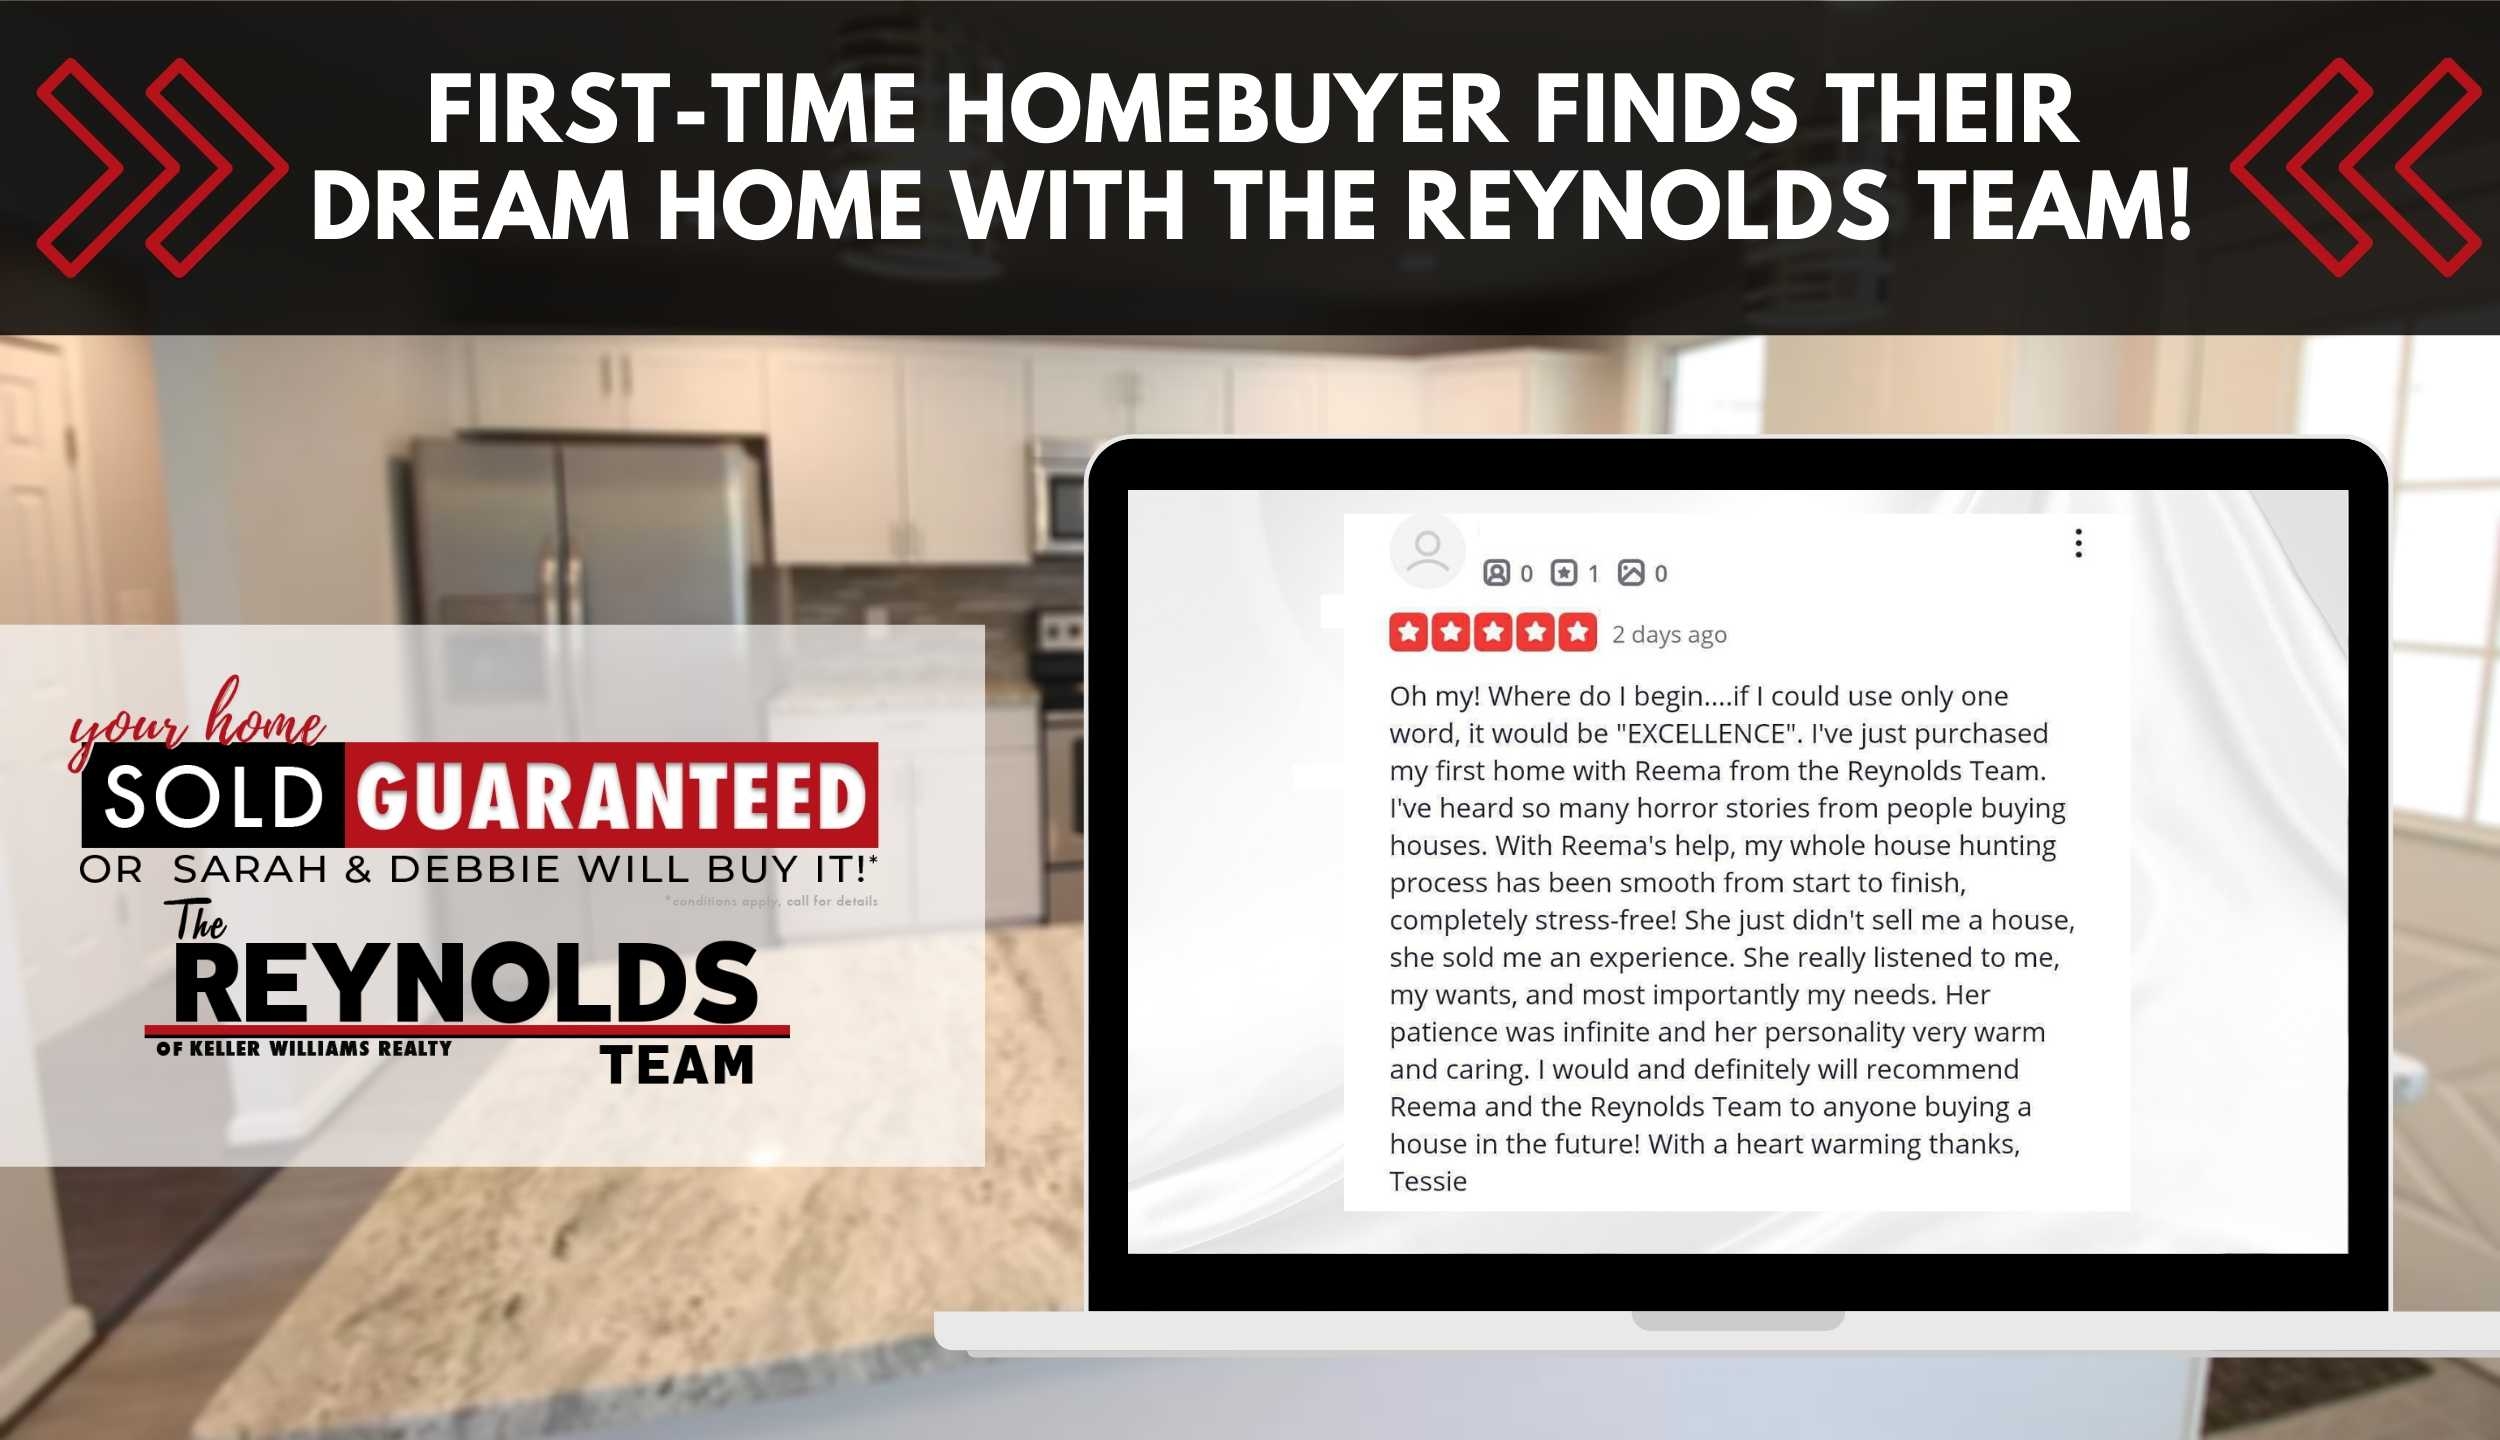 First-time Homebuyer Finds Their Dream Home with The Reynolds Team!